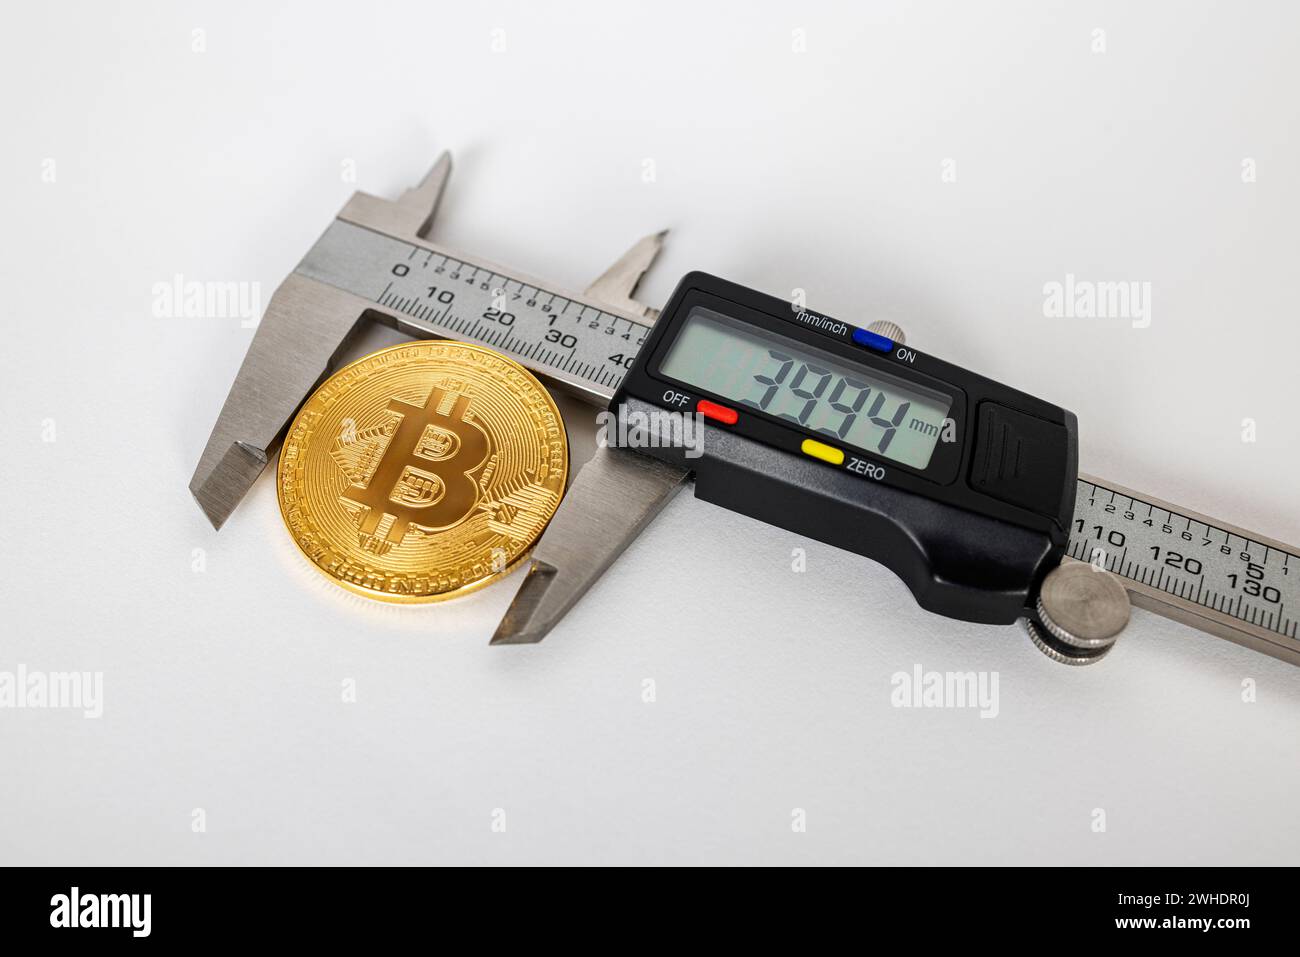 Electronic caliper measures the diameter of a Bitcoin coin, white background, Stock Photo